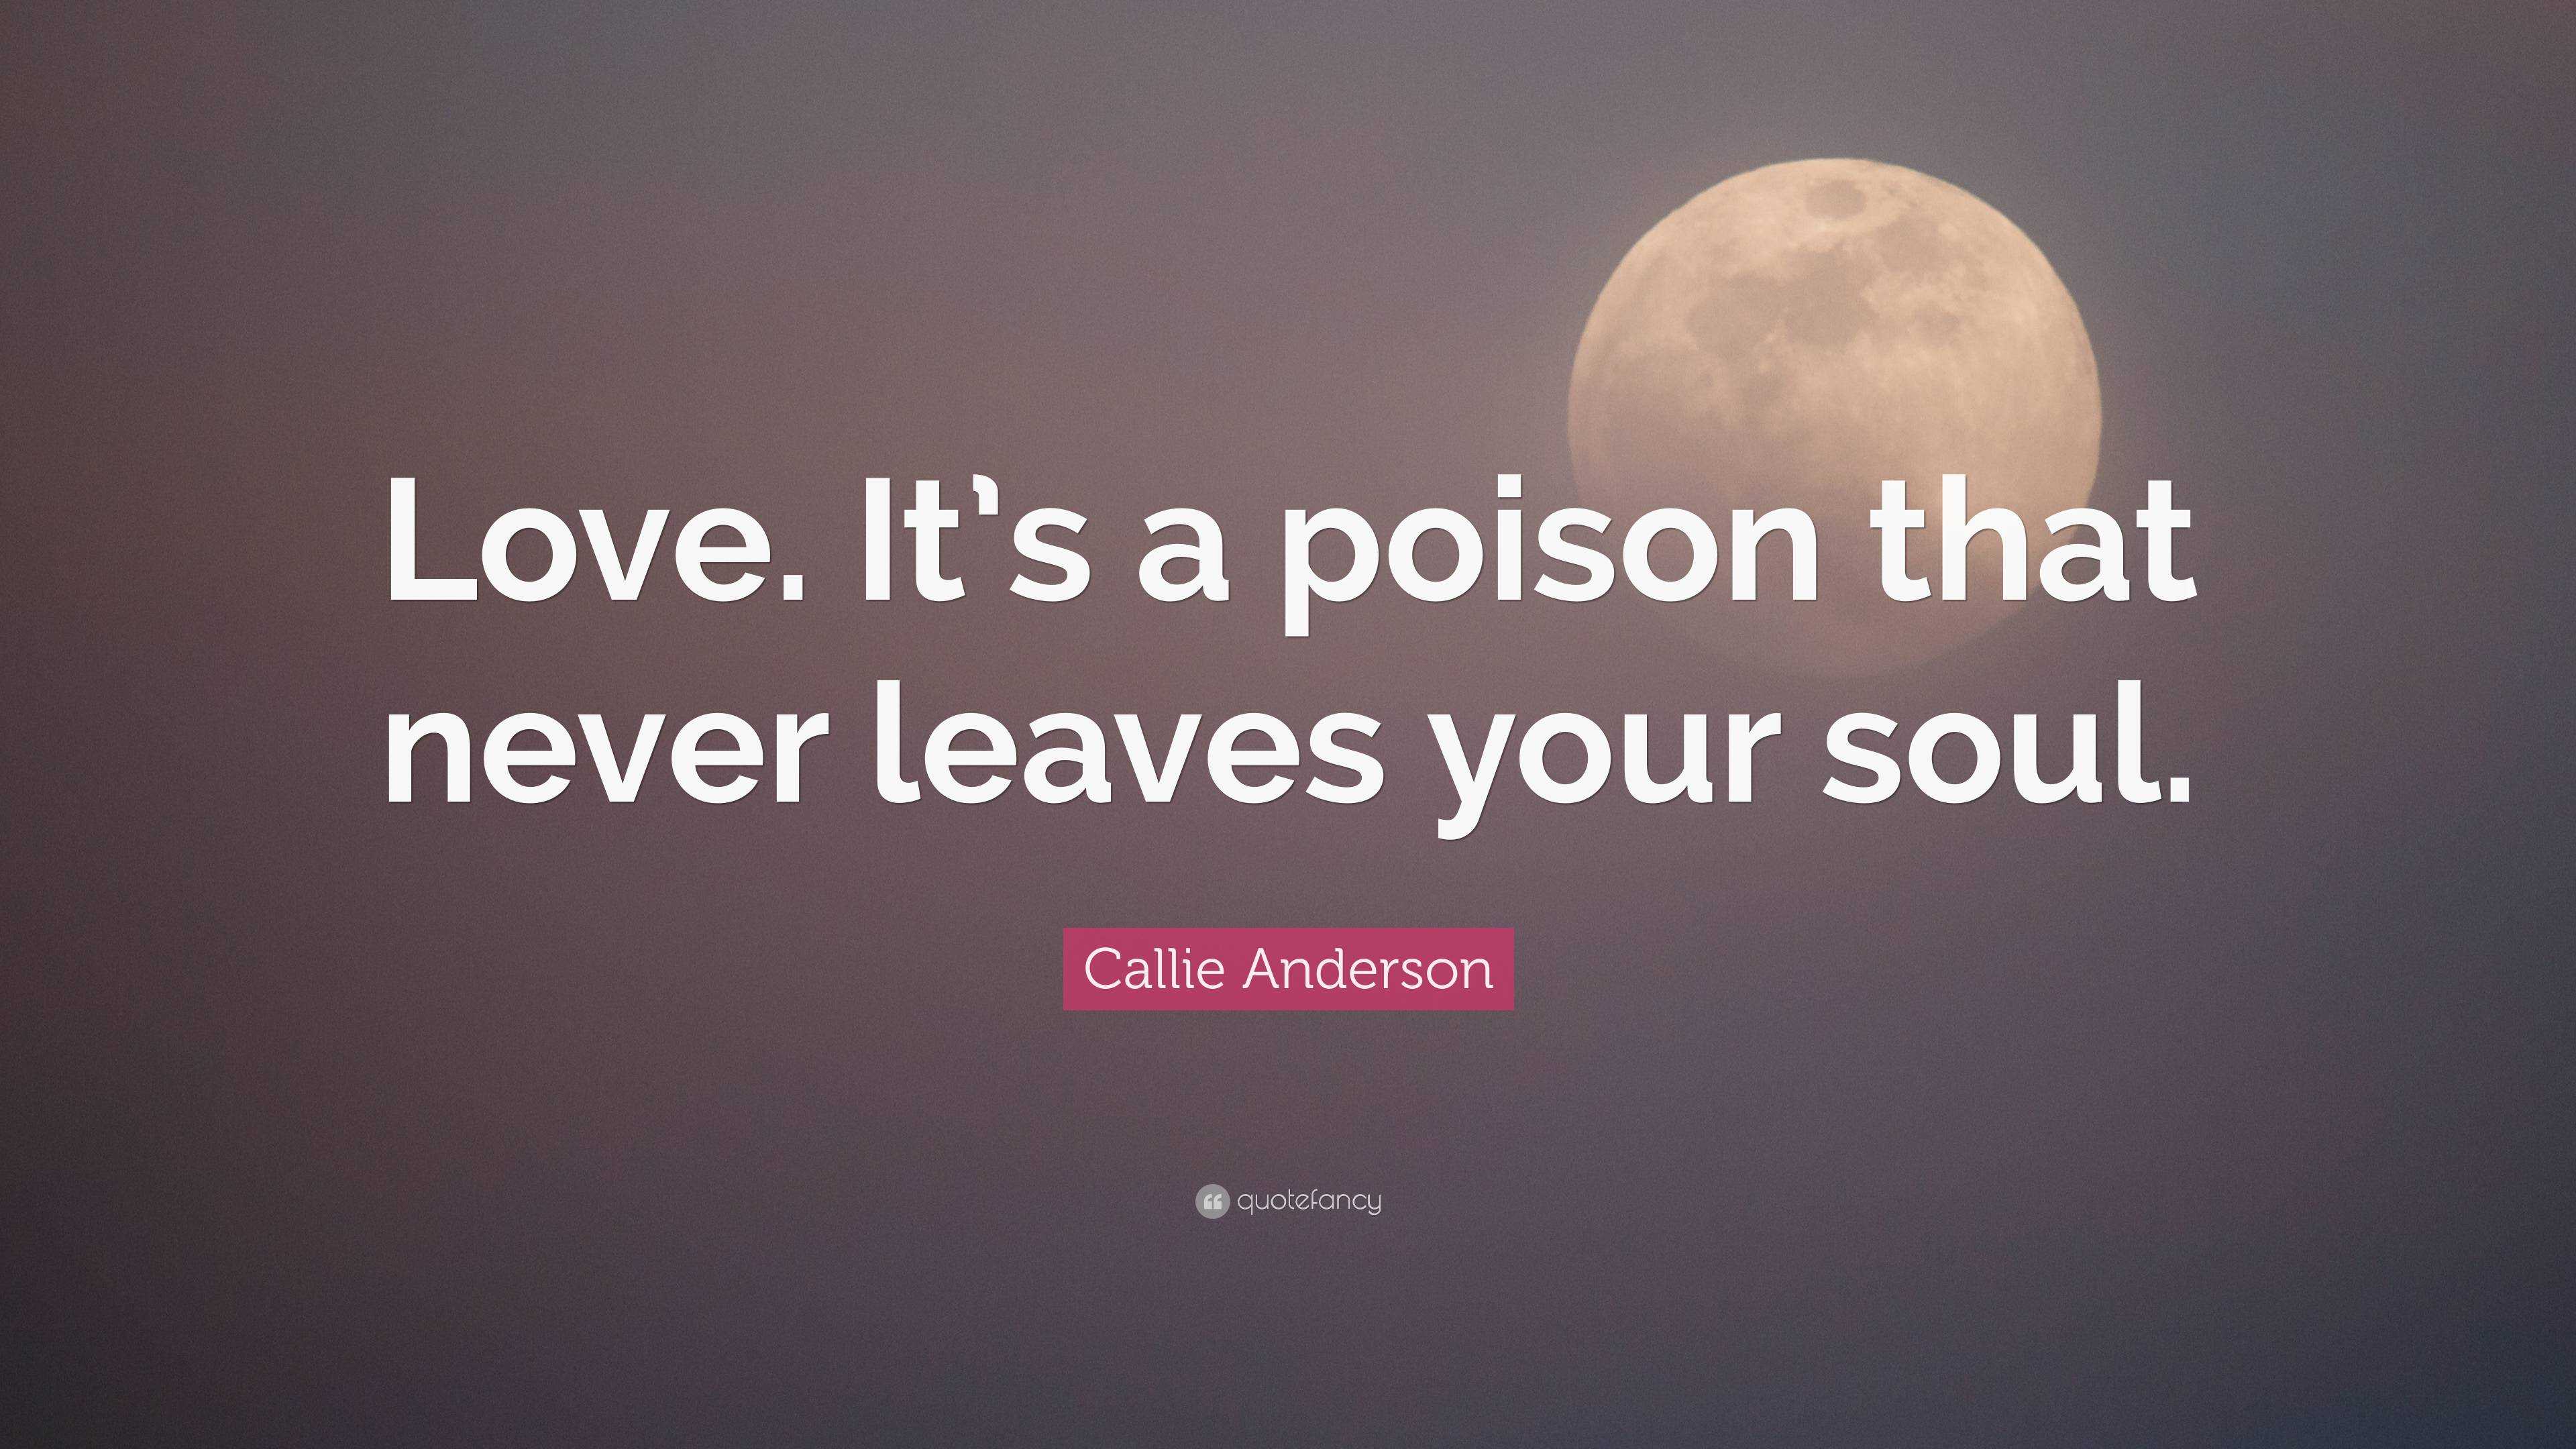 Callie Anderson Quote: “You only get one true love. That was what my mother  always told me. Whenever her soft-spoken voice said those words, she”